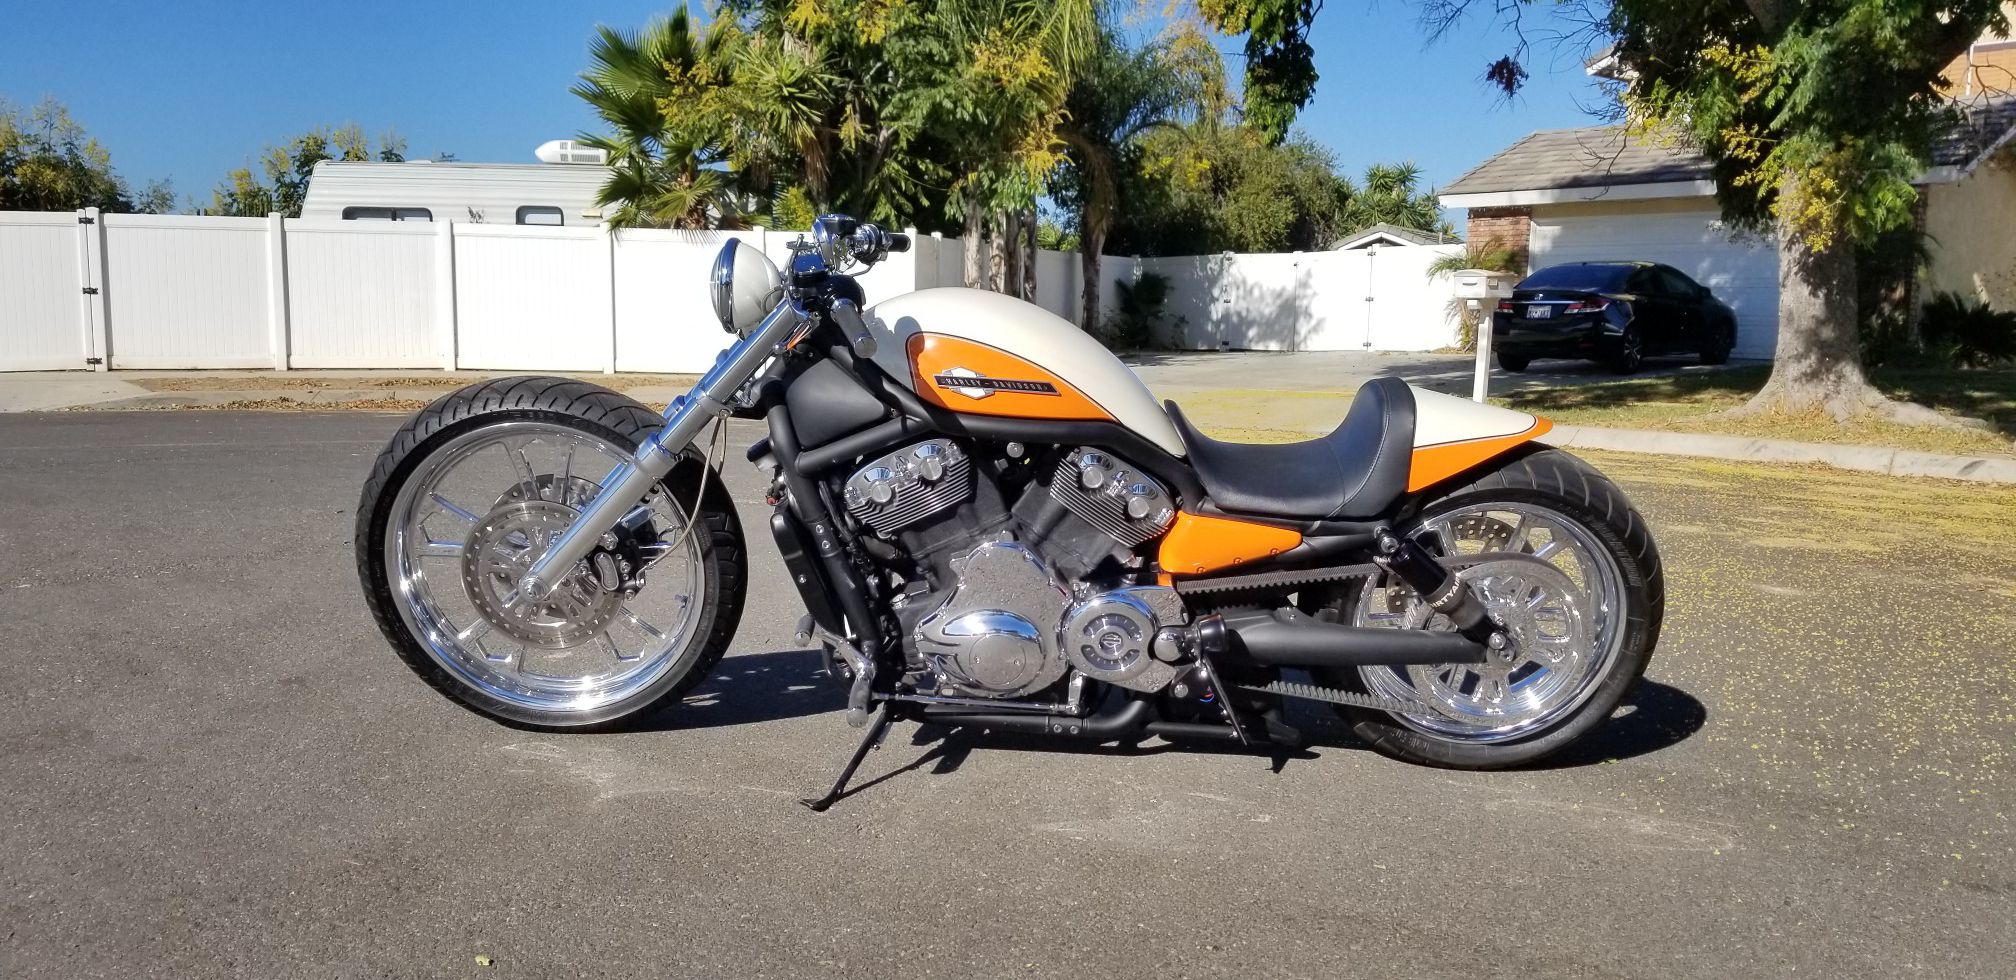 2004 Harley Davidson VROD customized out air ride loaded